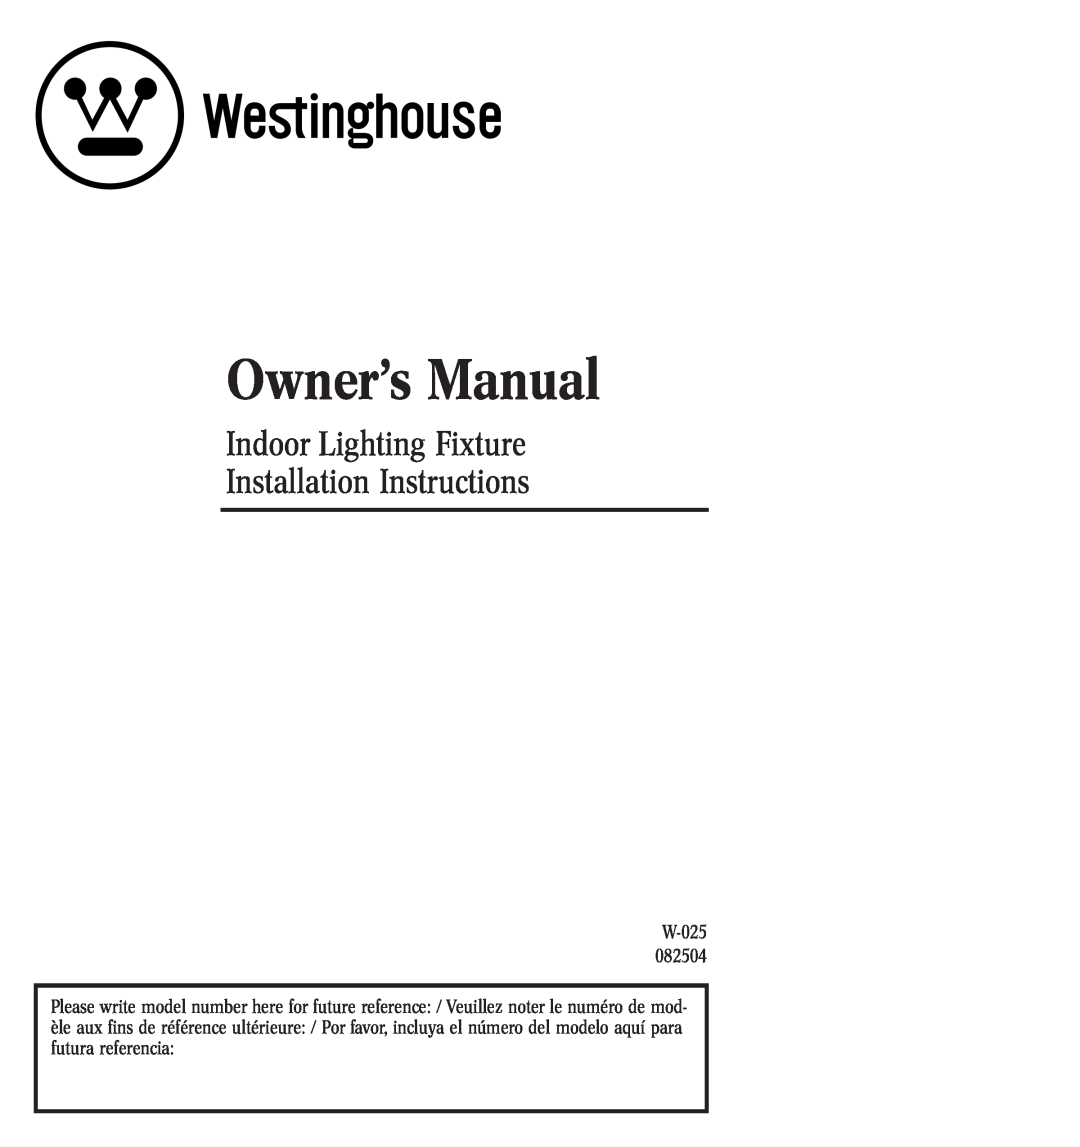 Westinghouse w-025 owner manual Owner’s Manual, Indoor Lighting Fixture Installation Instructions 